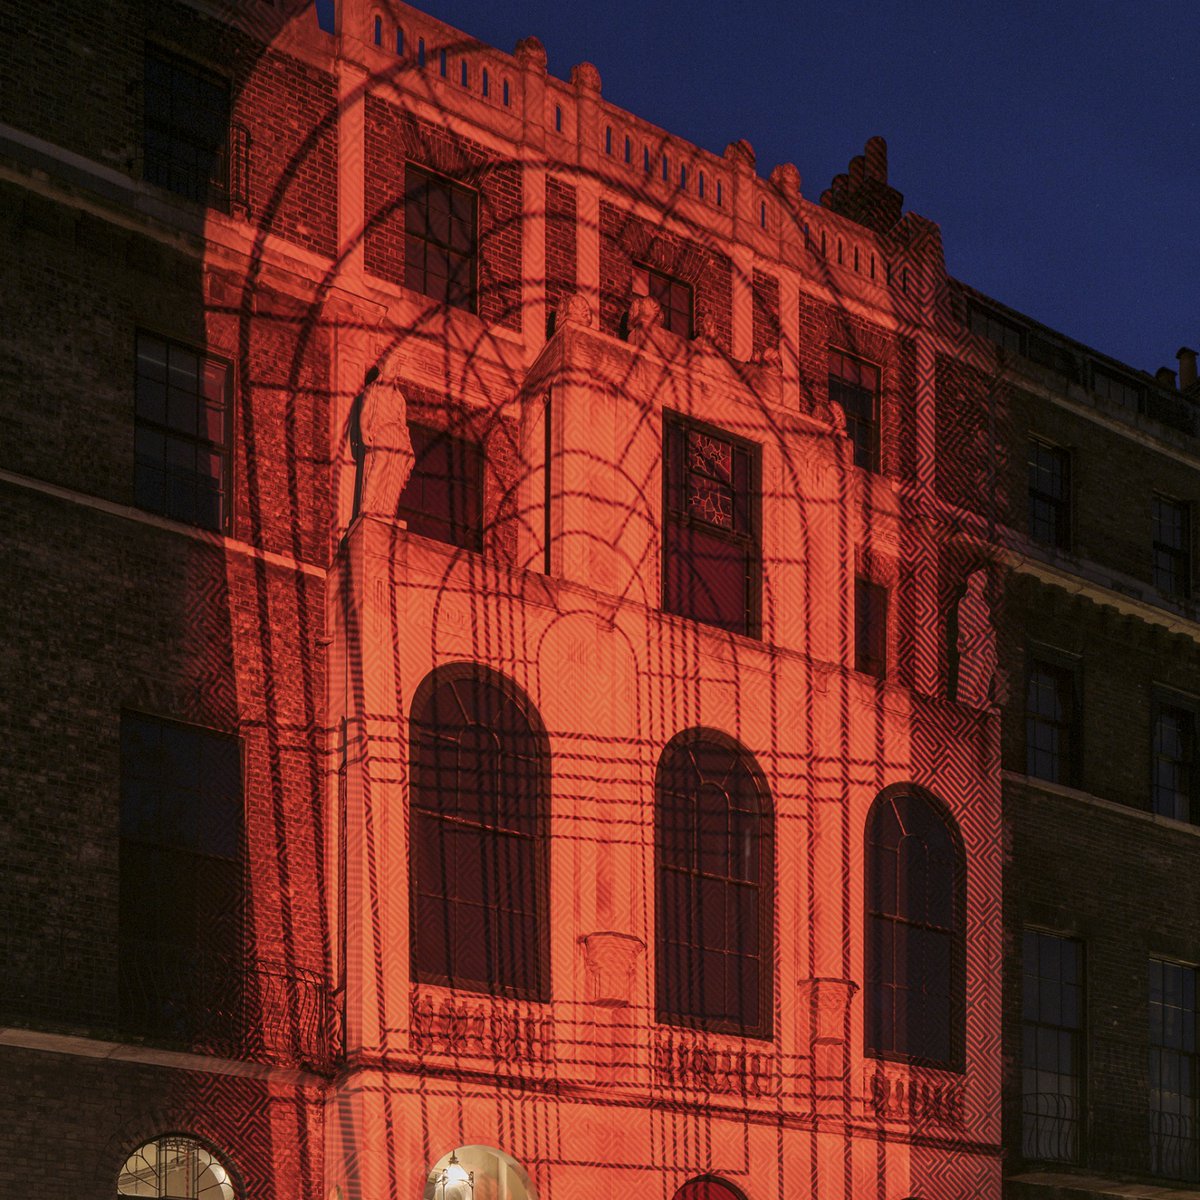 The Soane, illuminated – as you’ve never seen it before! 🎆✨ This unique work by artist Nayan Kulkarni is a contemporary take on the light shows that captured London imaginations during Soane’s time, as explored in our exhibition #GeorgianIlluminations. Isn’t it marvellous? 😍